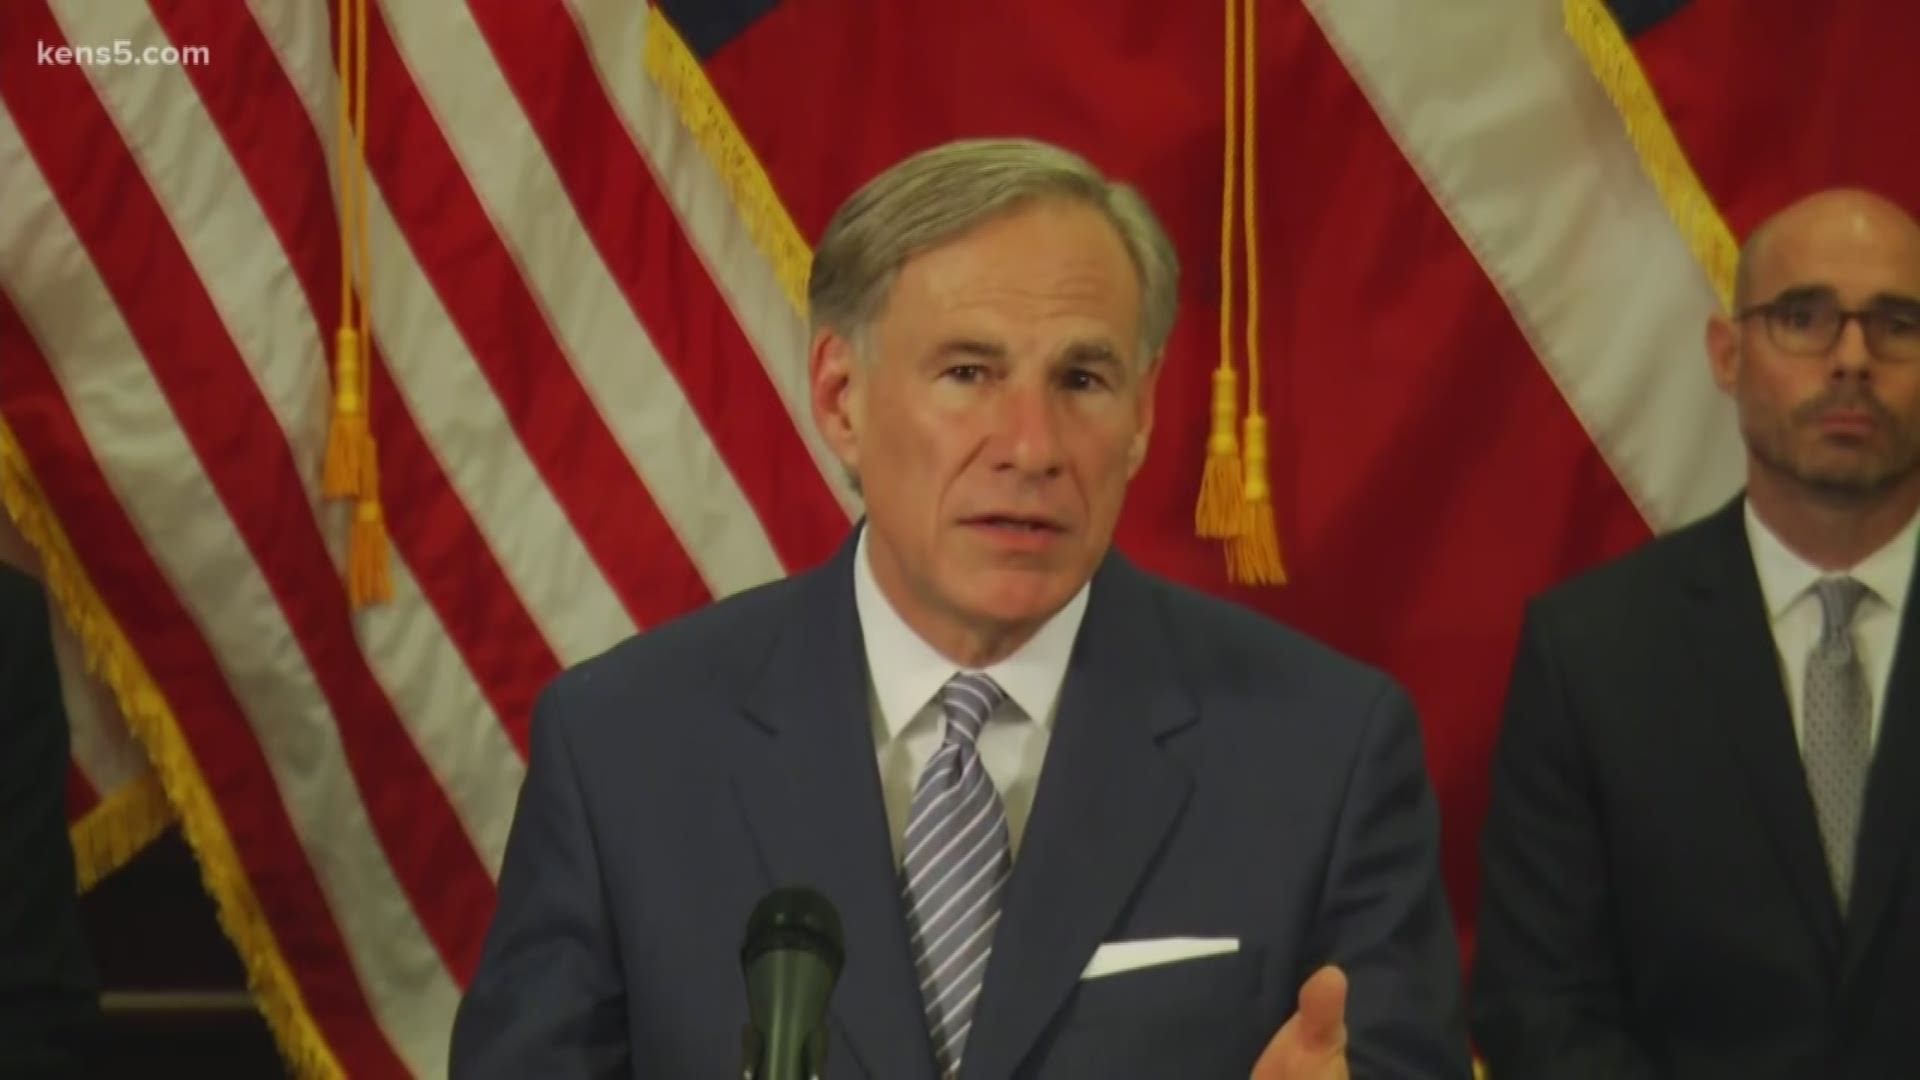 Governor Abbott announced that schools will stay closed for the remainder of the 2019-2020 school year.